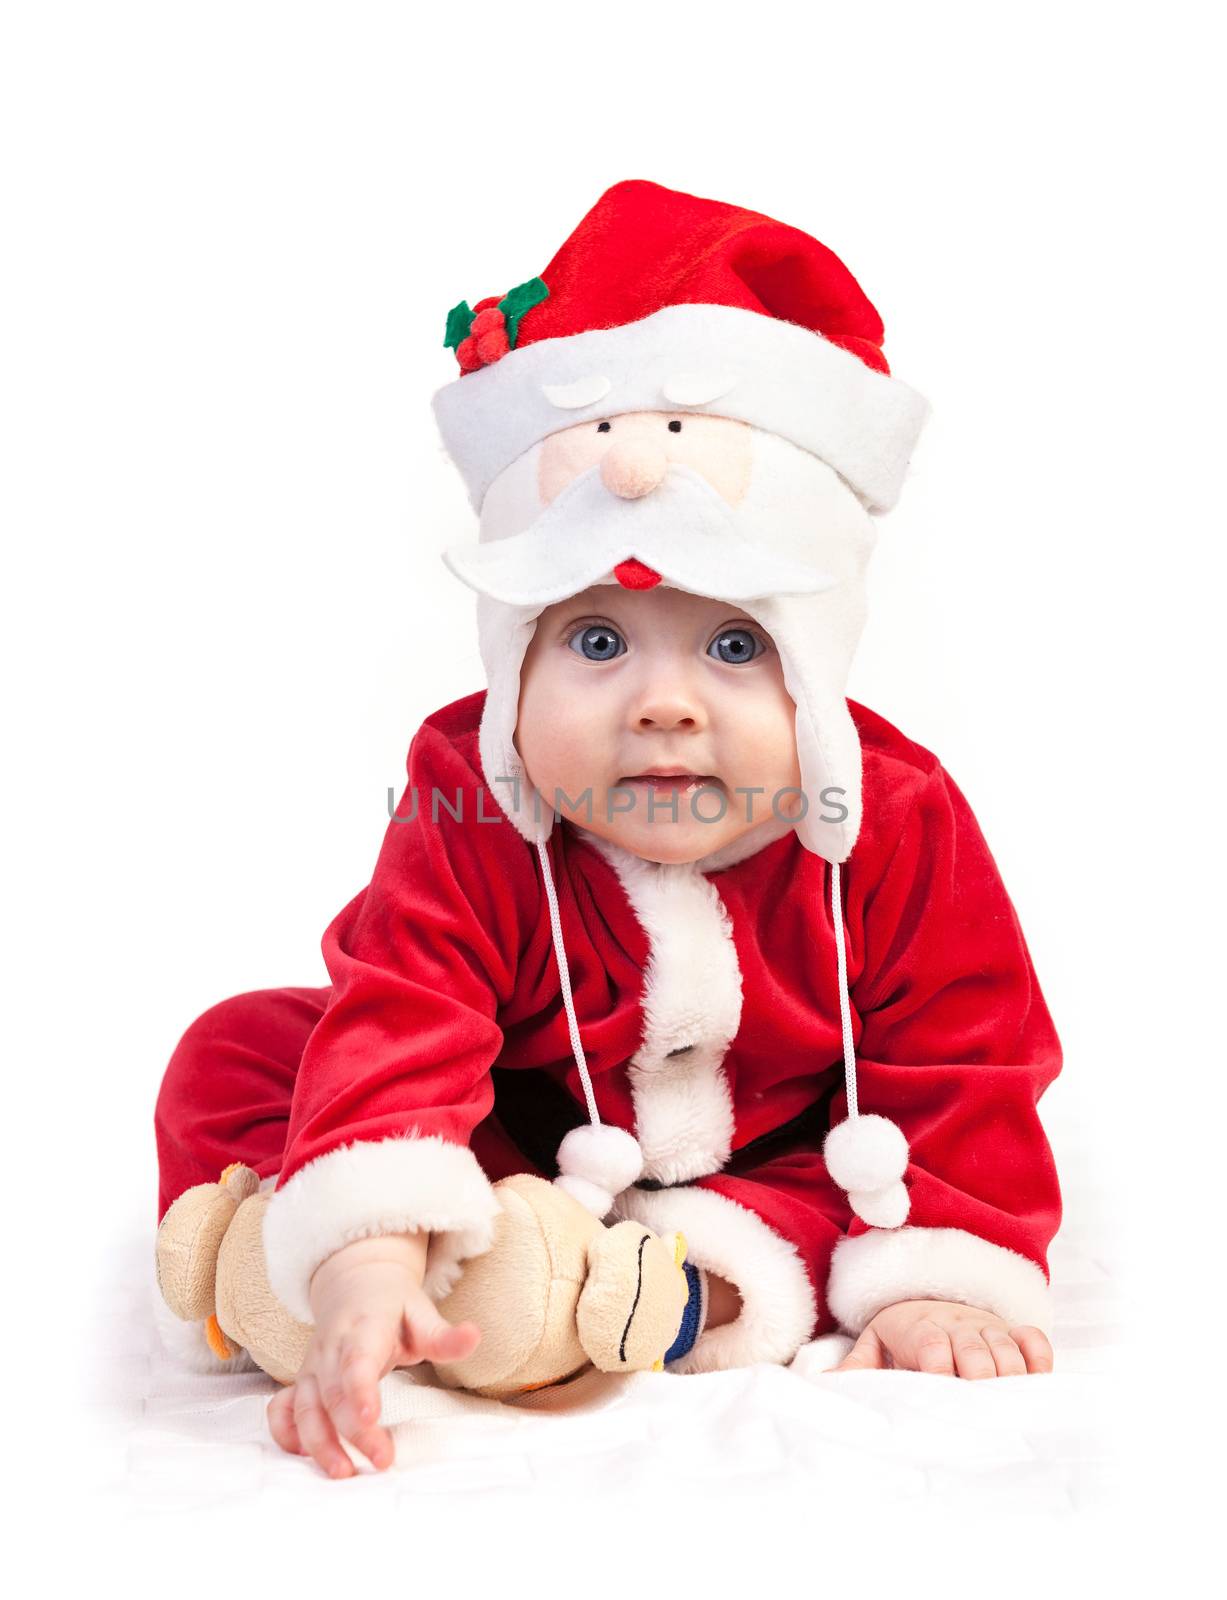 Cute little boy in Santa costume over white by photobac